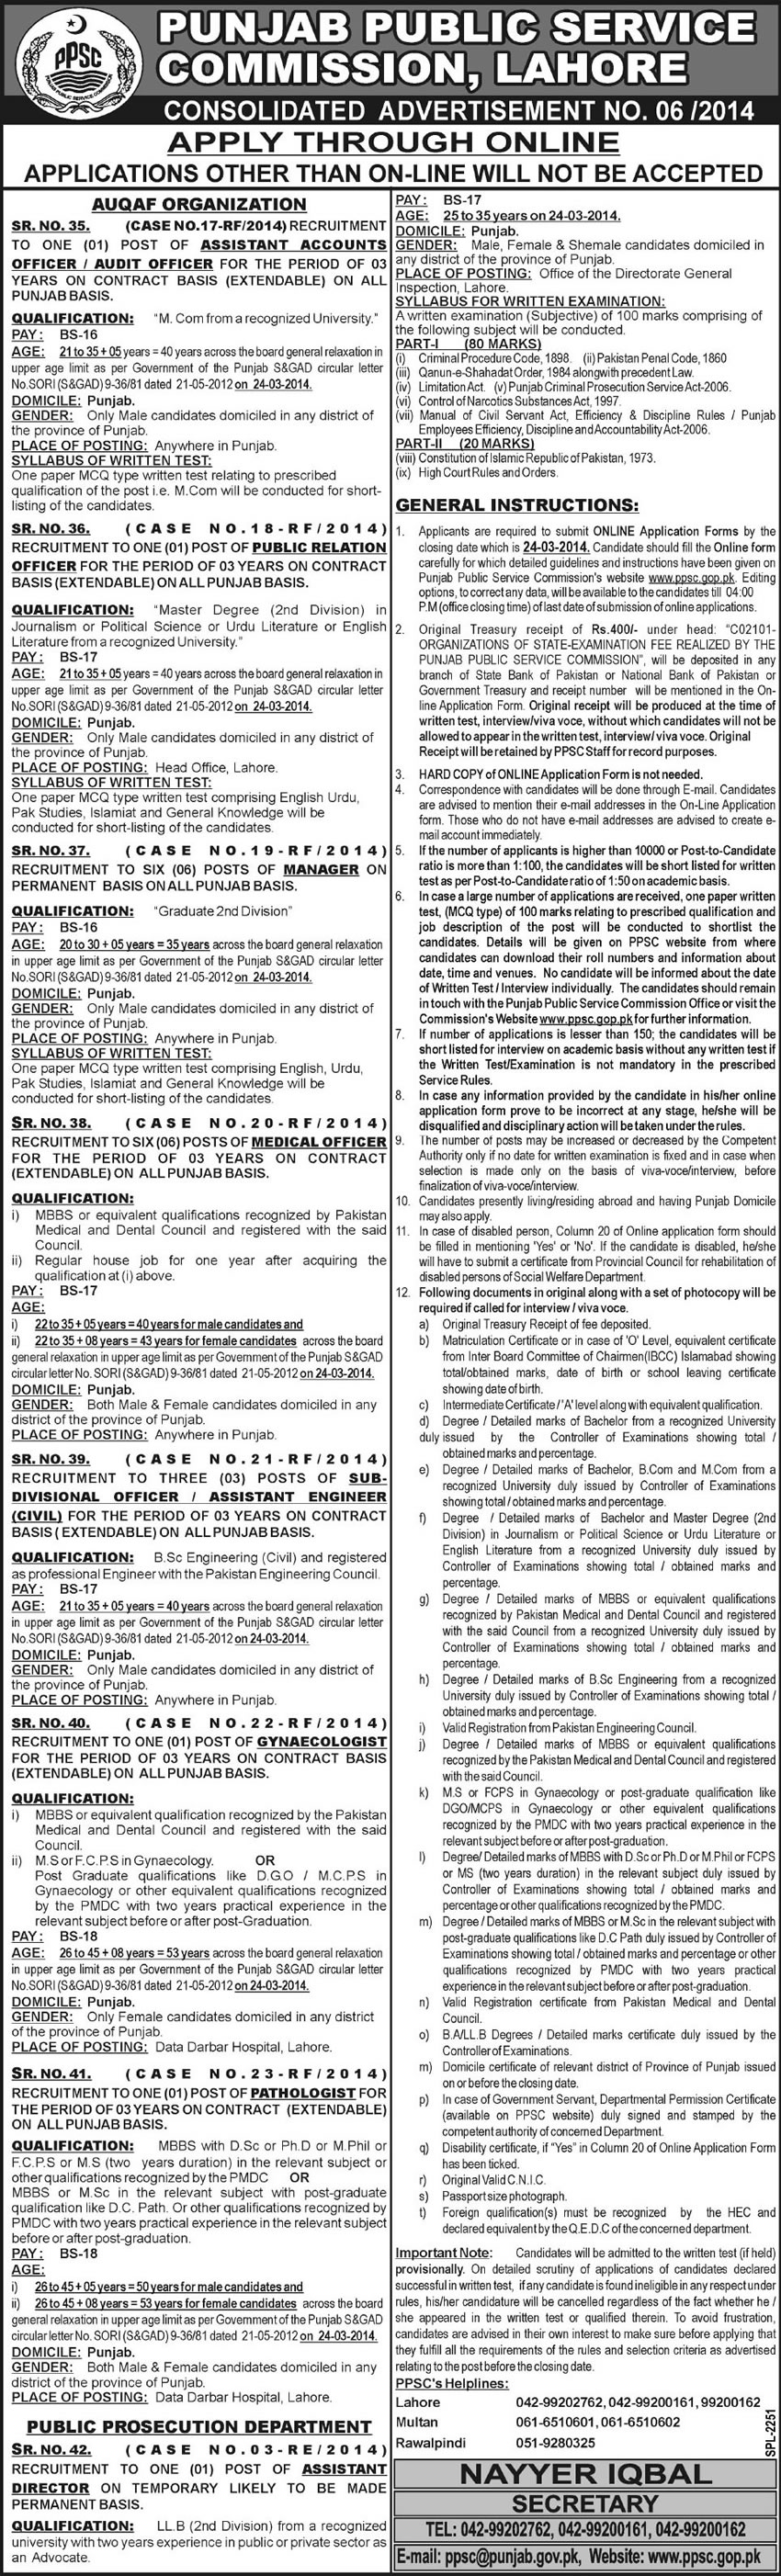 PPSC Jobs 2014 March Consolidated Advertisement No 06/2014